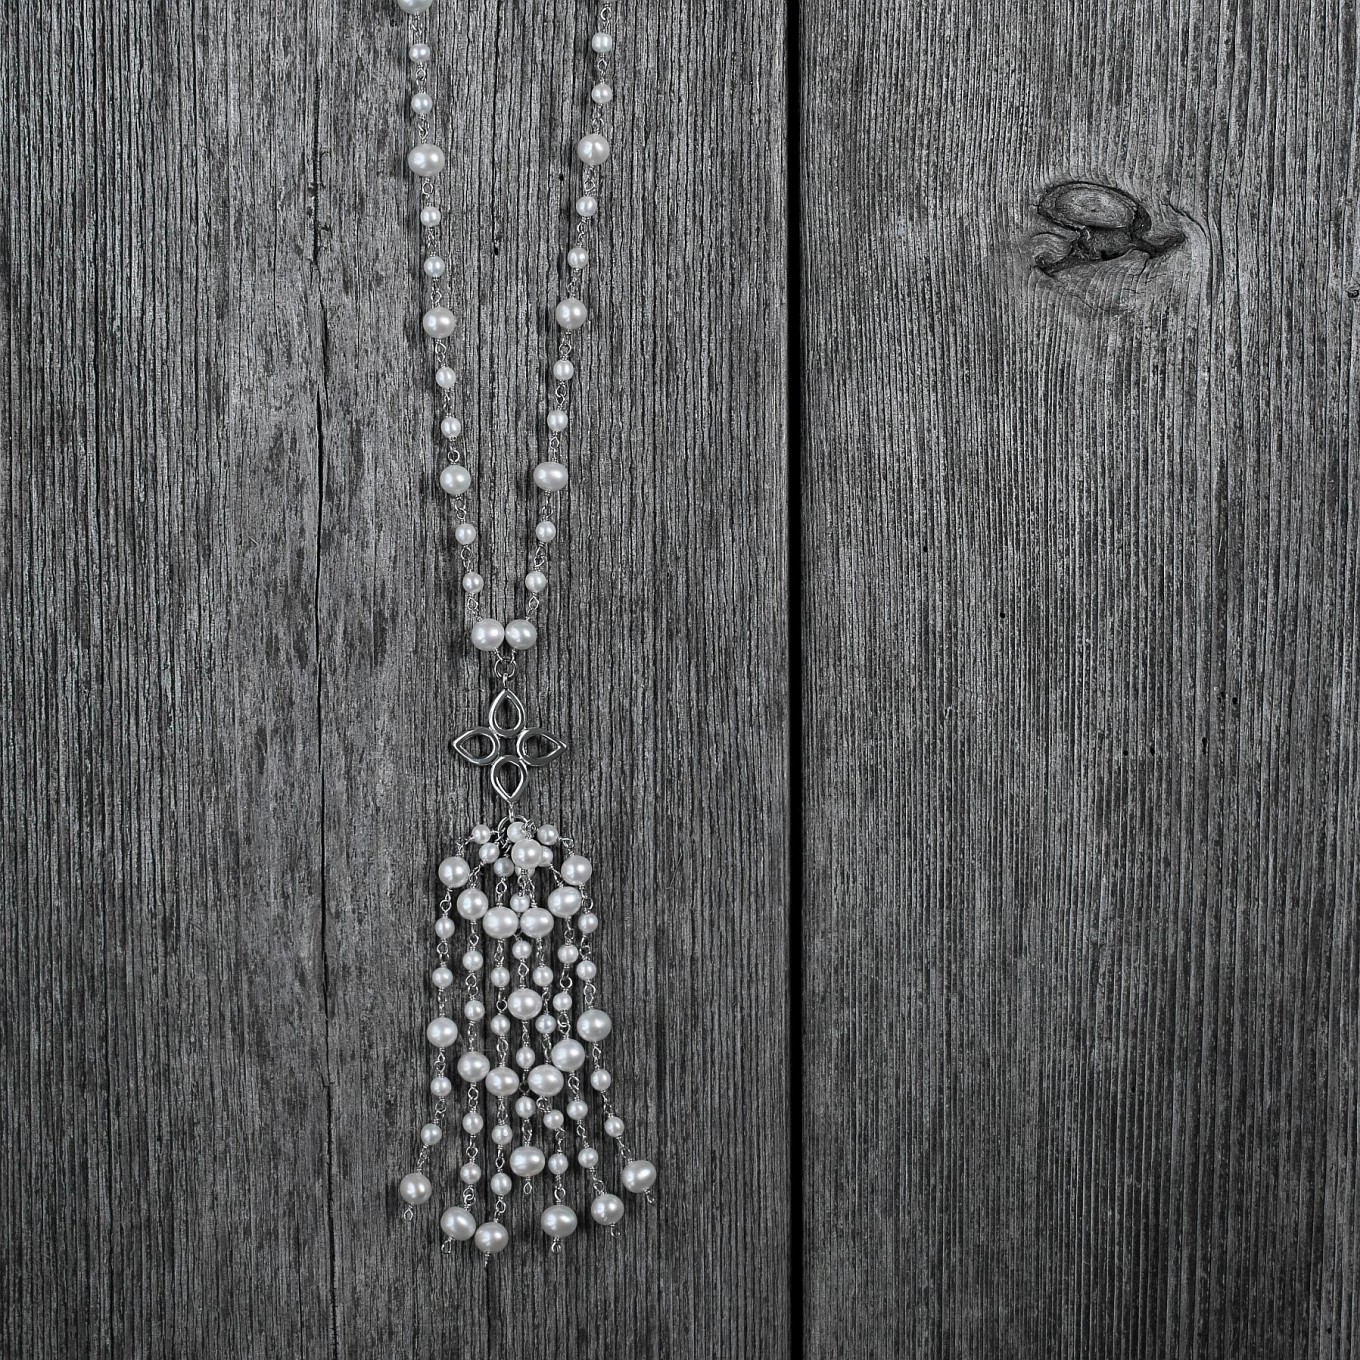 Freshwater pearl tassel necklace with Sevilla motifs in sterling silver